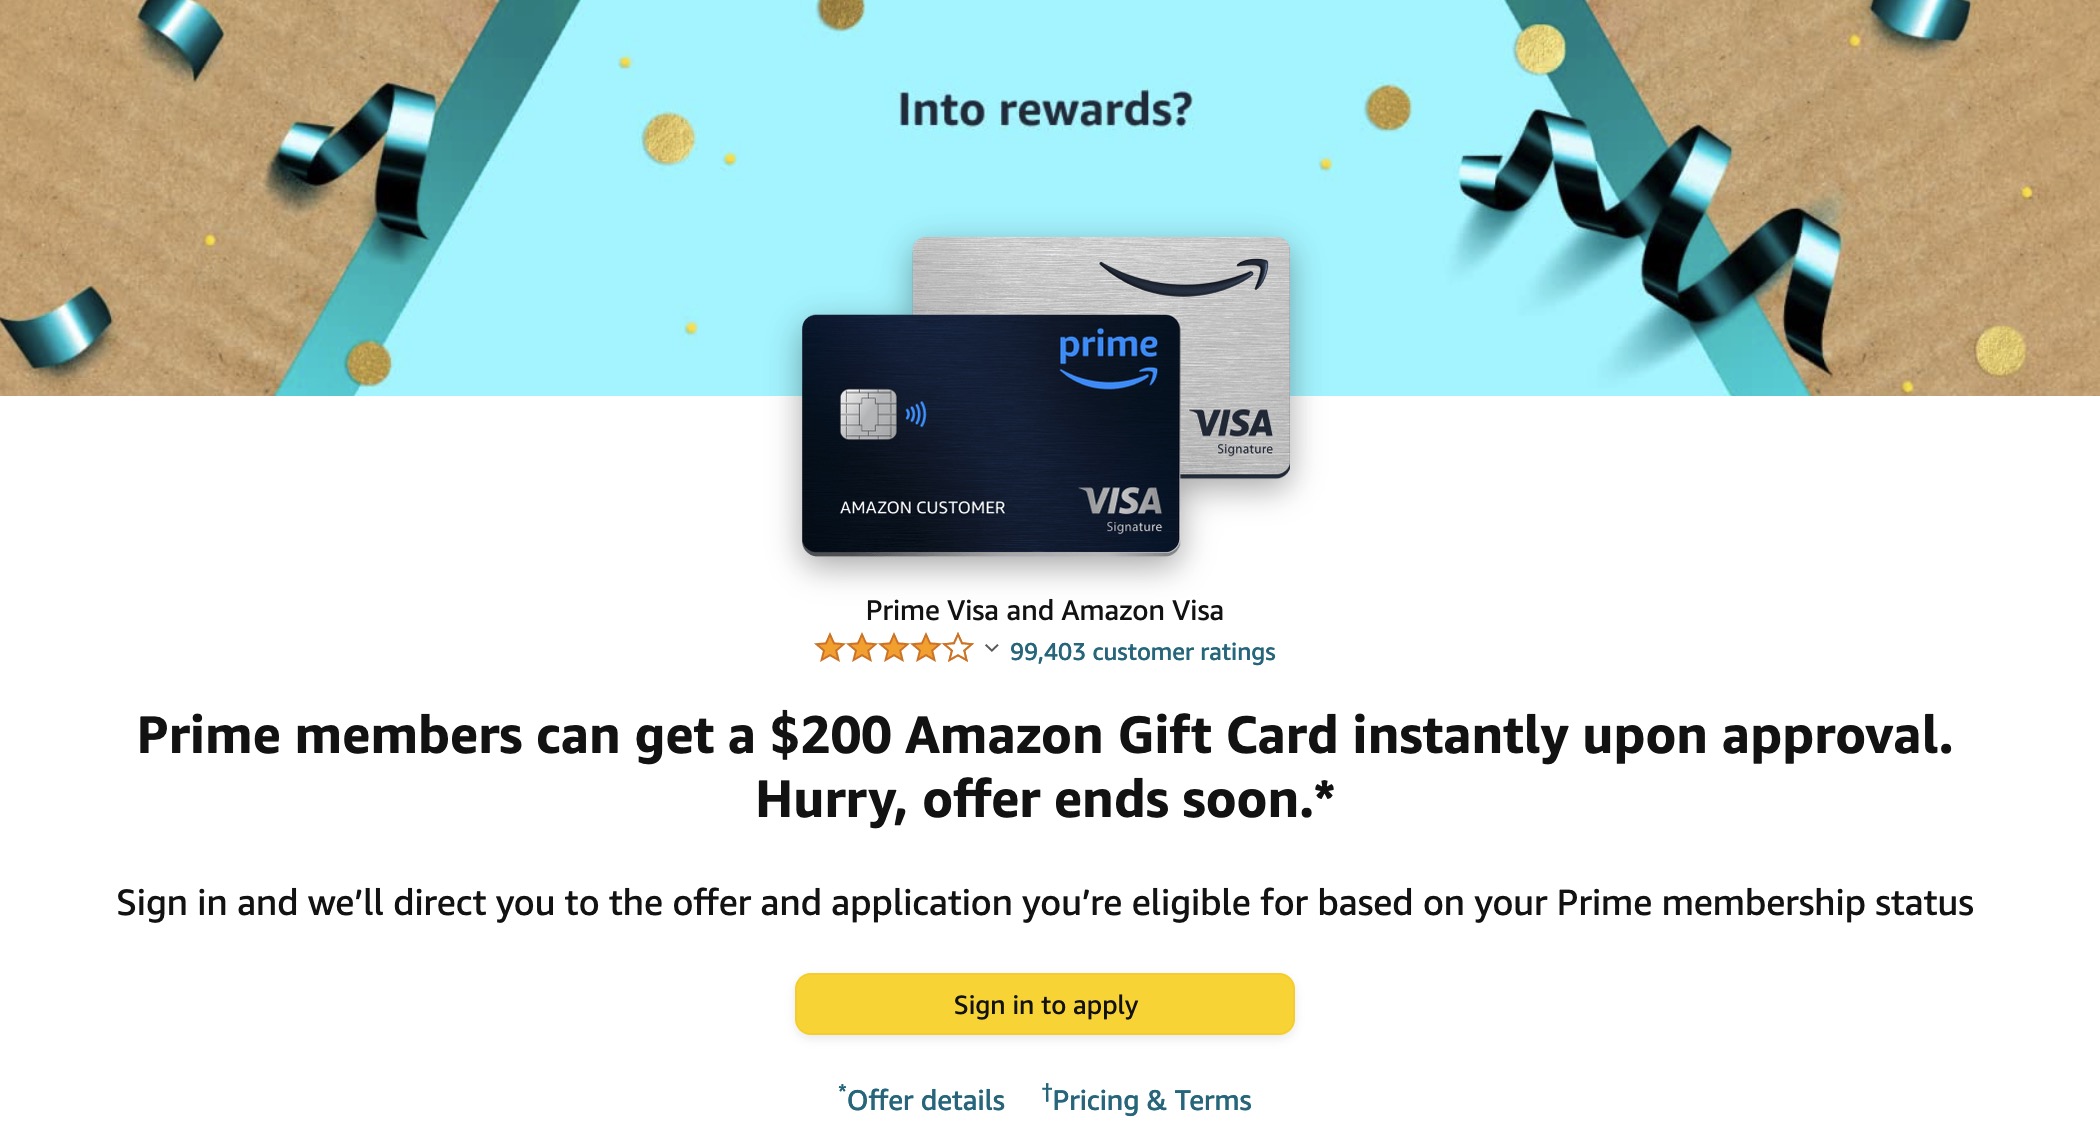 Amazon Gift Card Email Glitch Causes Customer Confusion - MalwareTips Blog